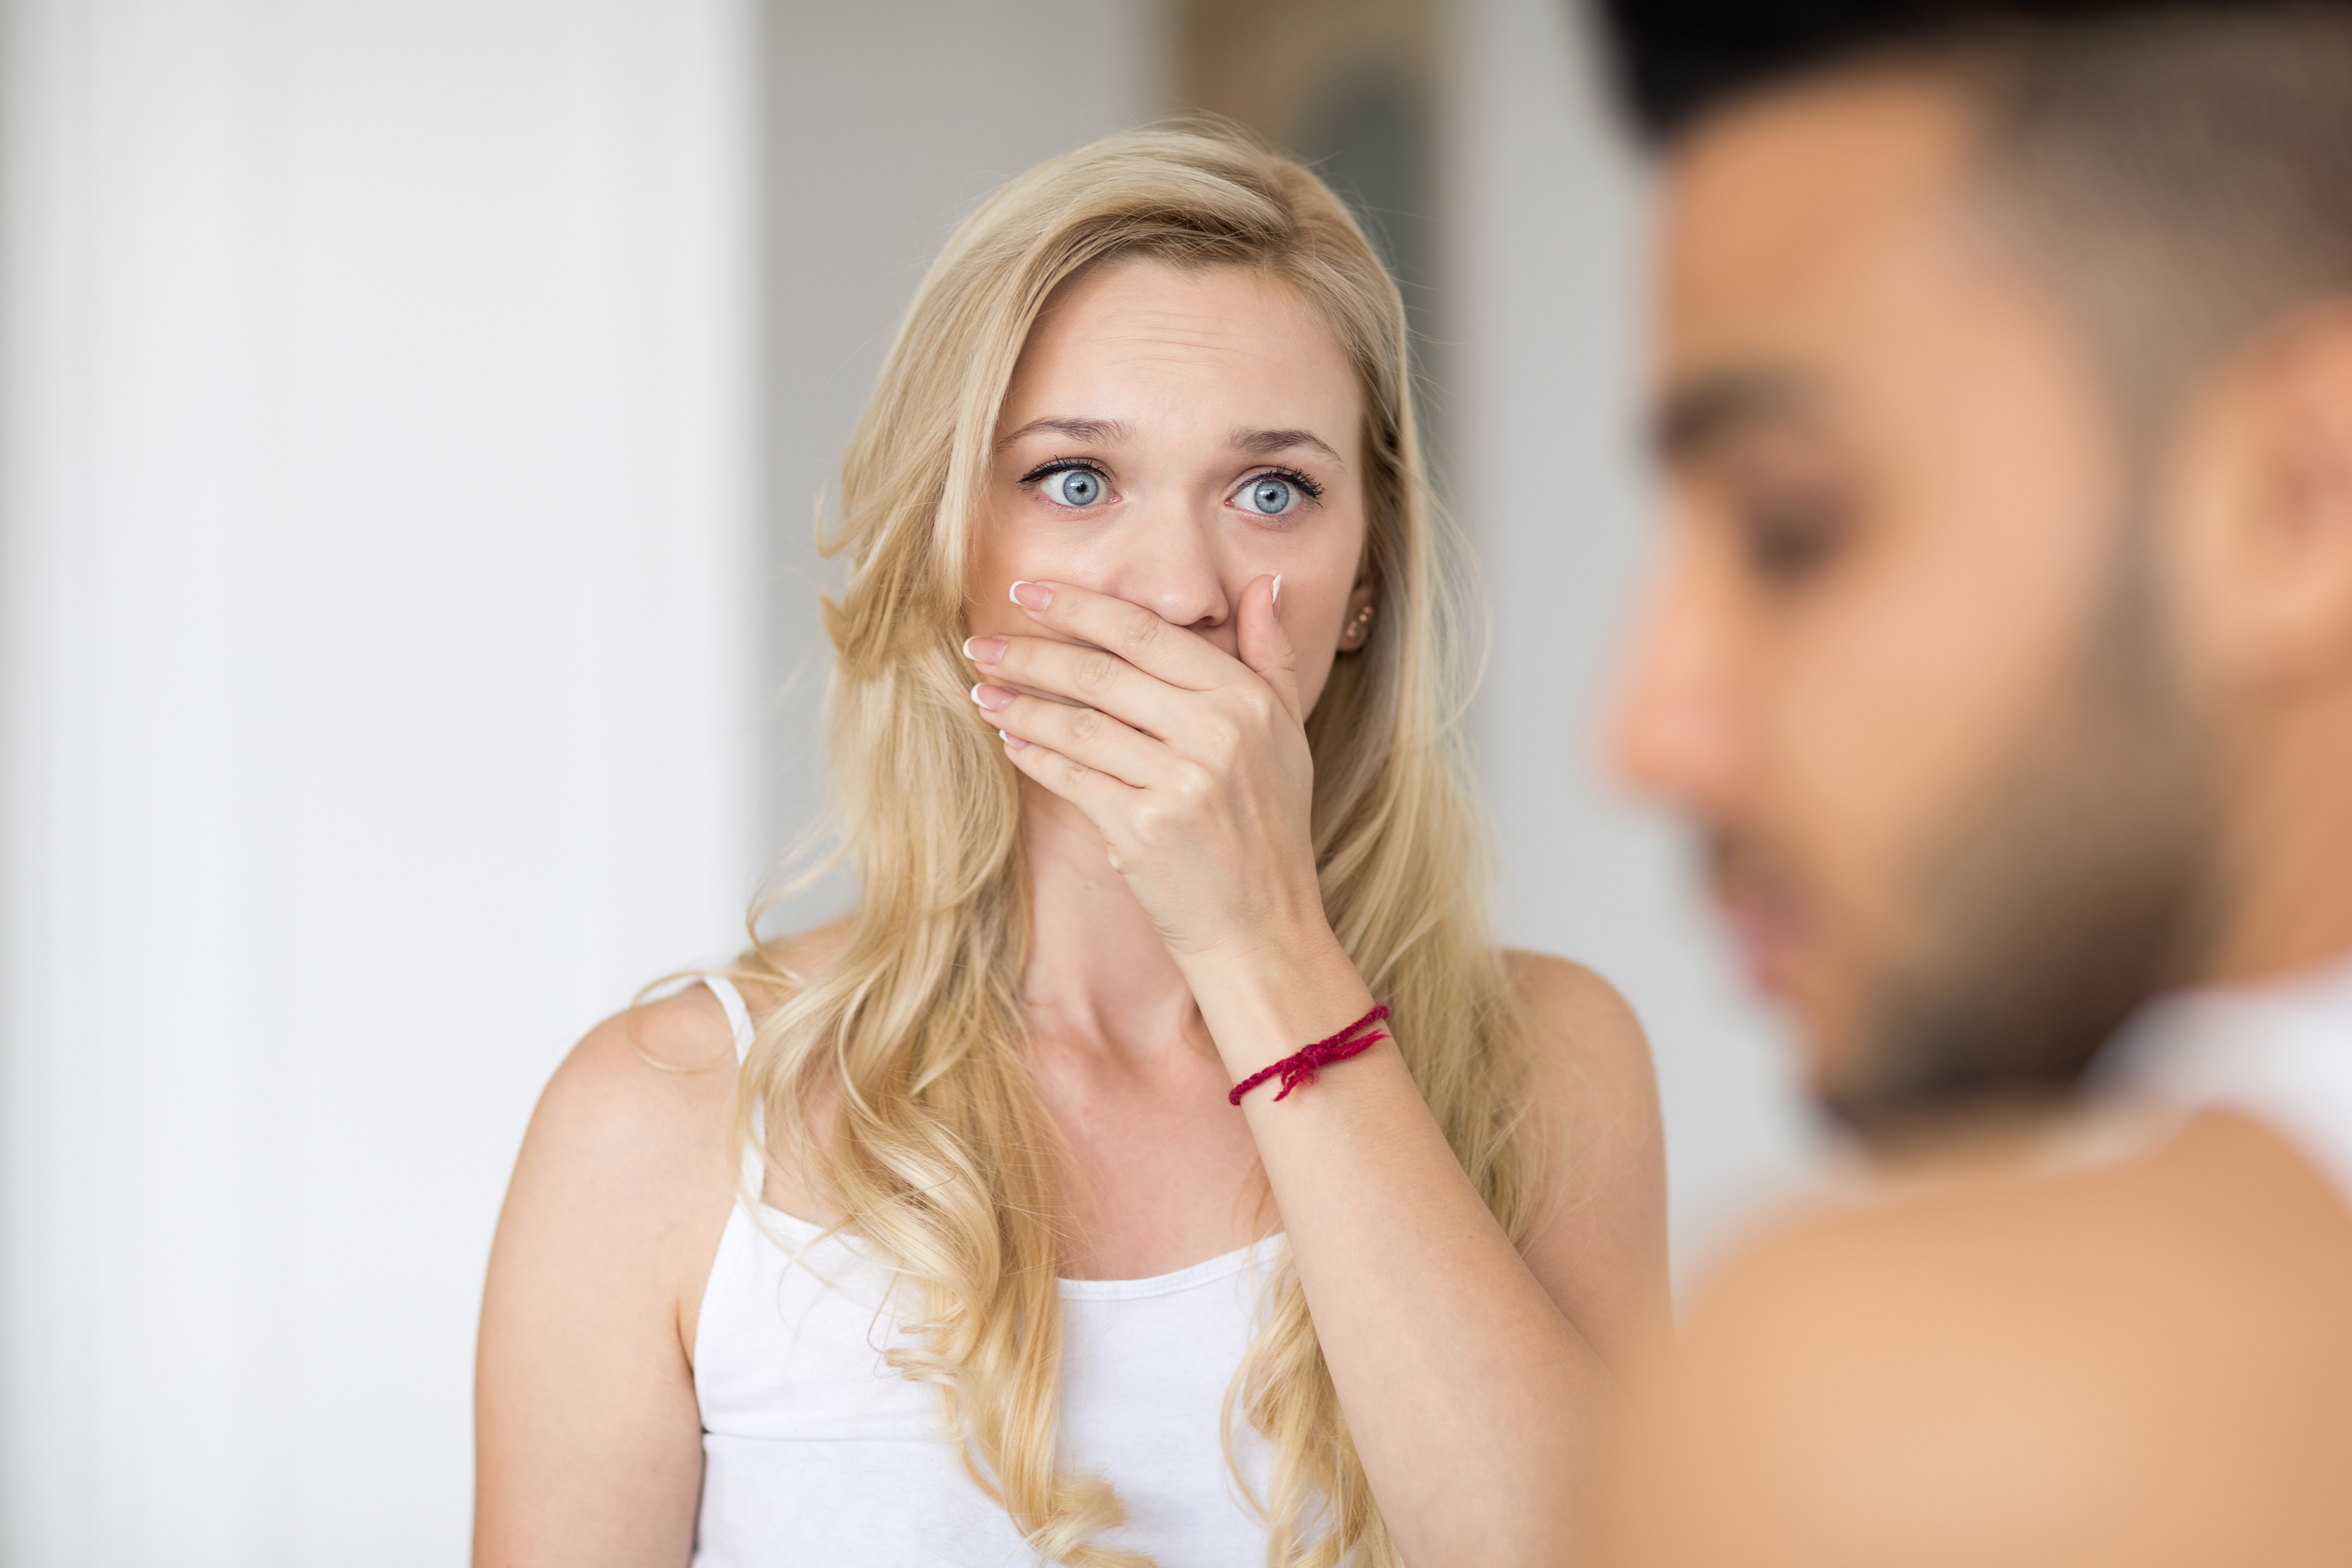 A shocked woman looking at the man in front of her | Source: Shutterstock